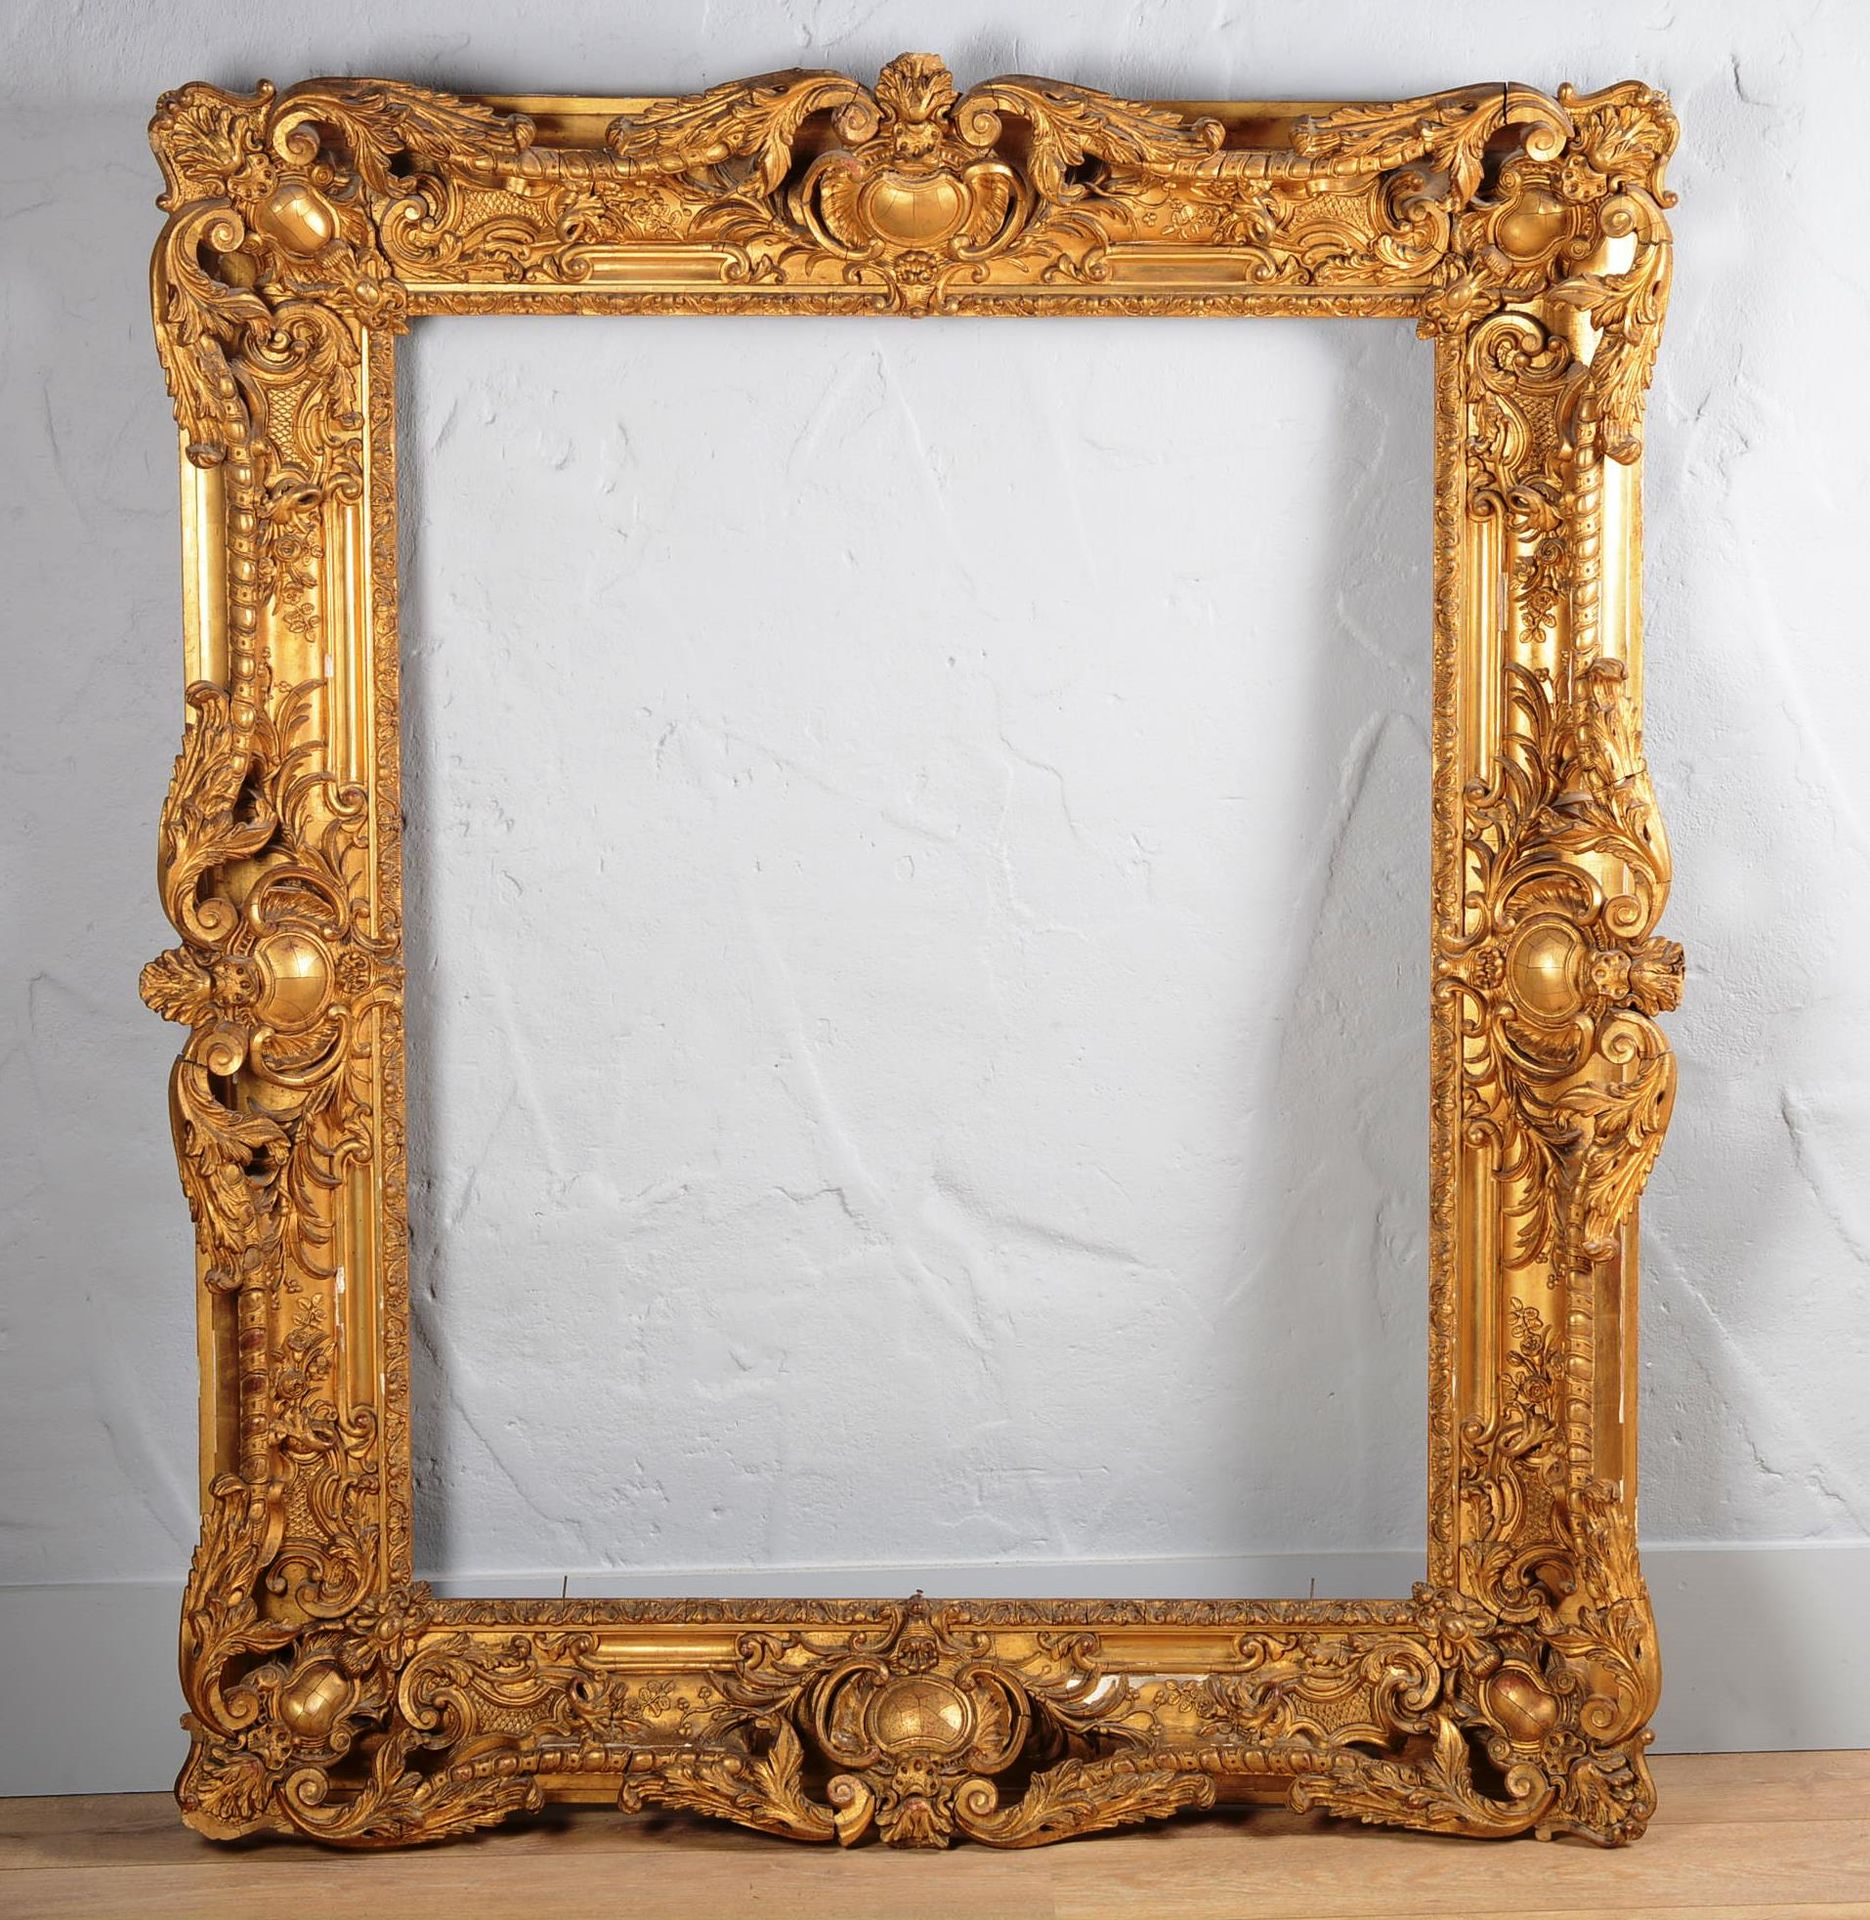 Bel encadrement en bois sculpté Beautiful carved and gilded wood frame from the &hellip;